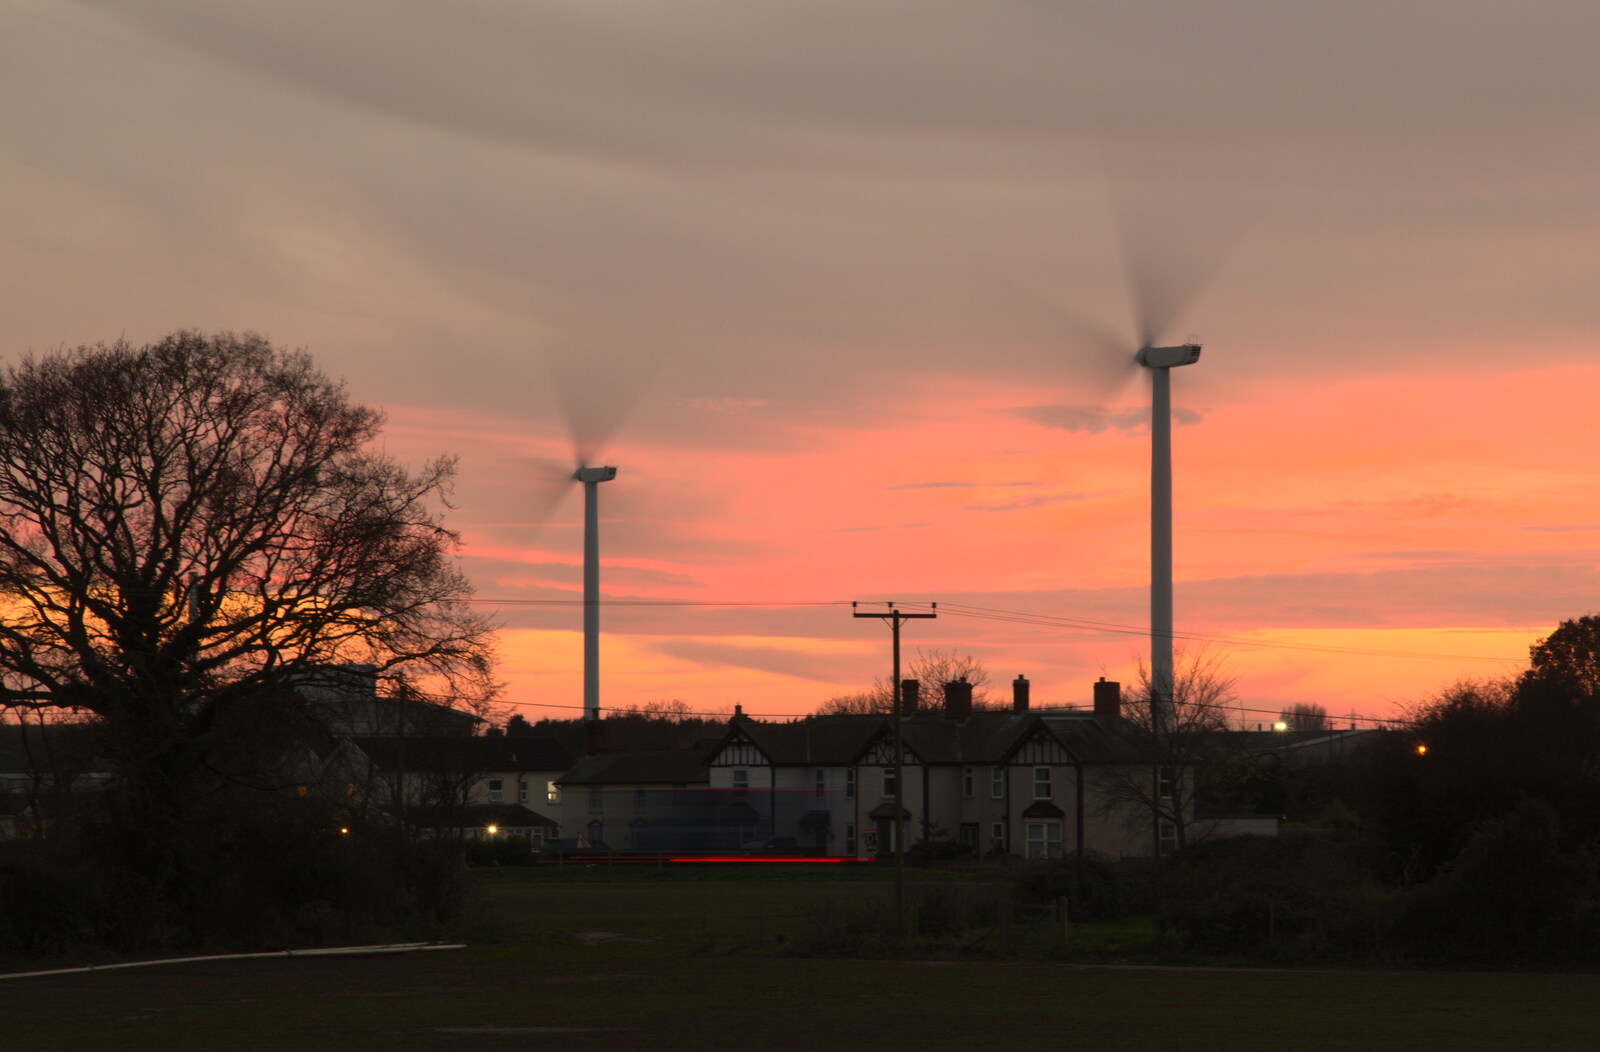 The wind turbines spin in the evening glow from The Dereliction of Eye, Suffolk - 22nd November 2020